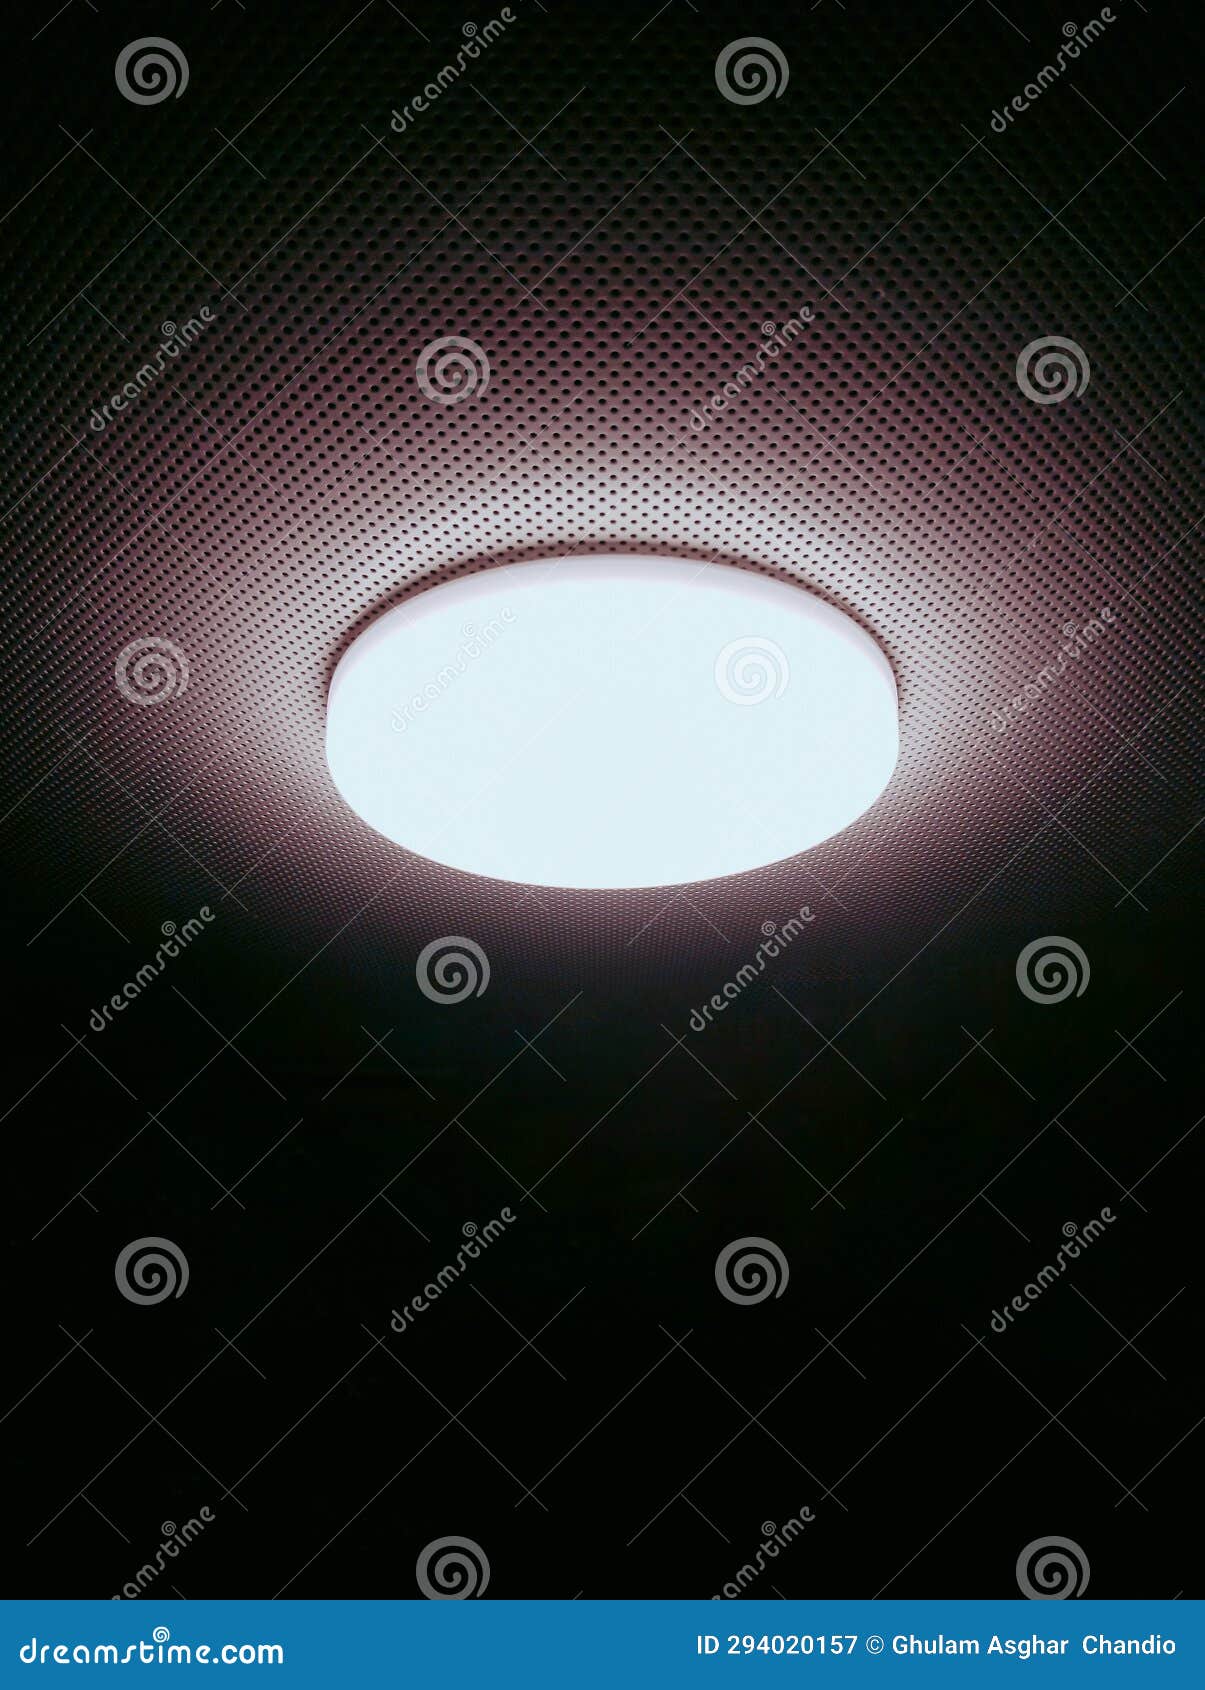 led ceiling light glowing at night darkness bathroomlight mounted ledlamp plafonnier image lampara techo picture luz teto photo